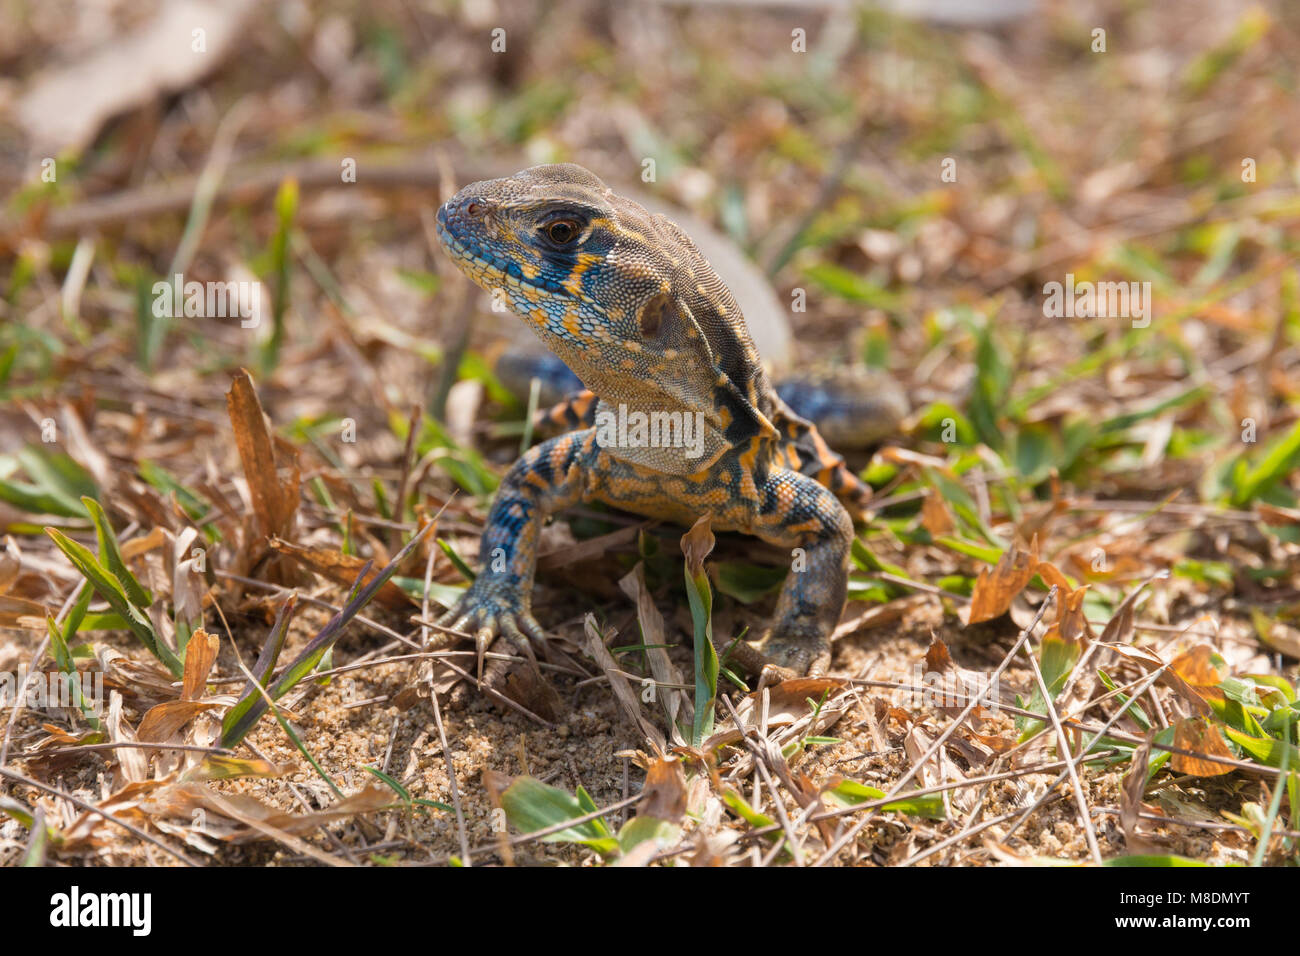 A close-up of the front body of a common butterfly lizard (Leiolepis belliana) on a field in Terengganu, Malaysia. Stock Photo